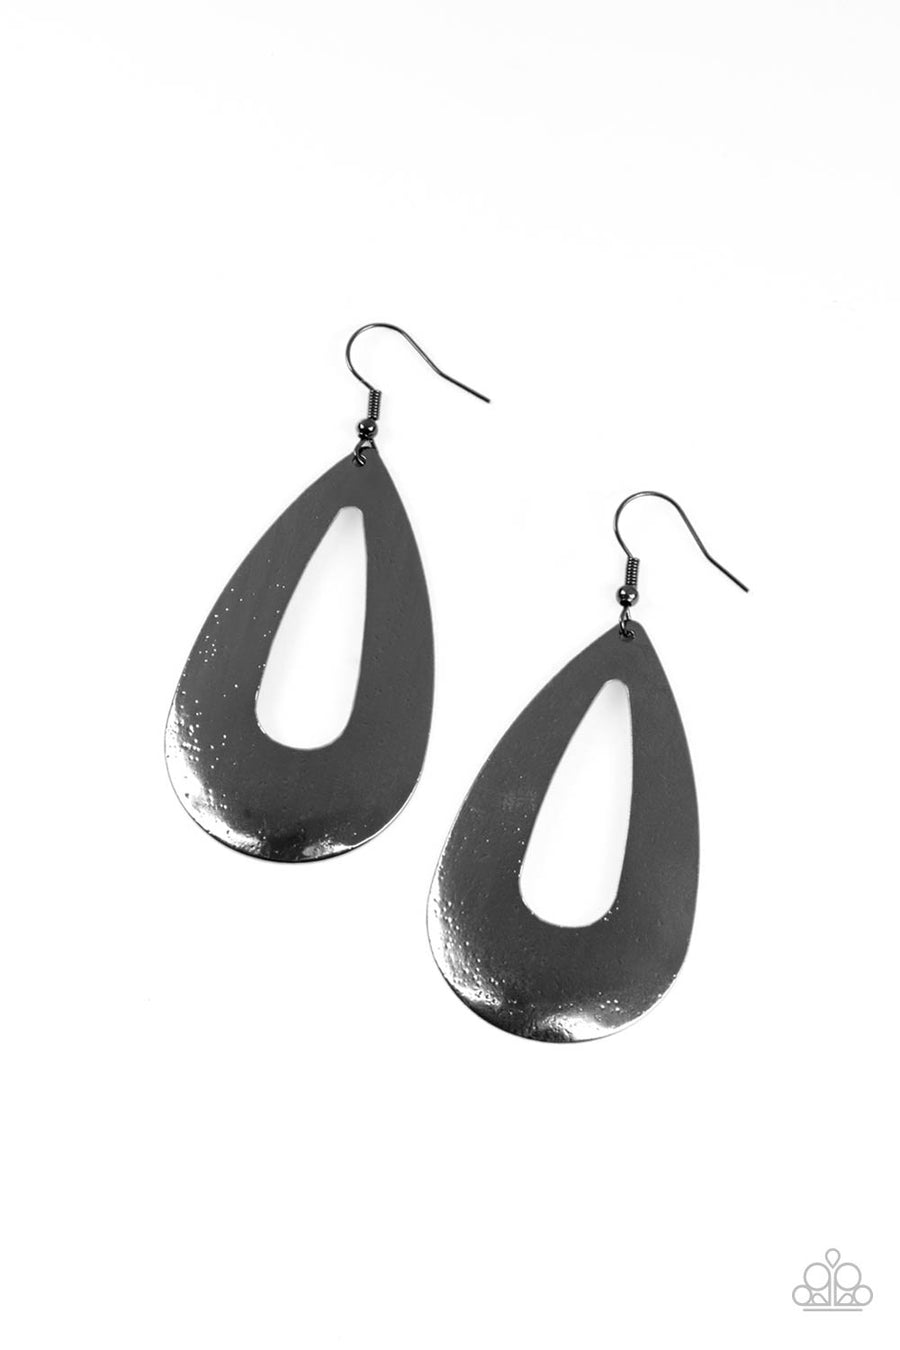 Hand It OVAL! - Black Hammered Earrings- Paparrazi Accessories